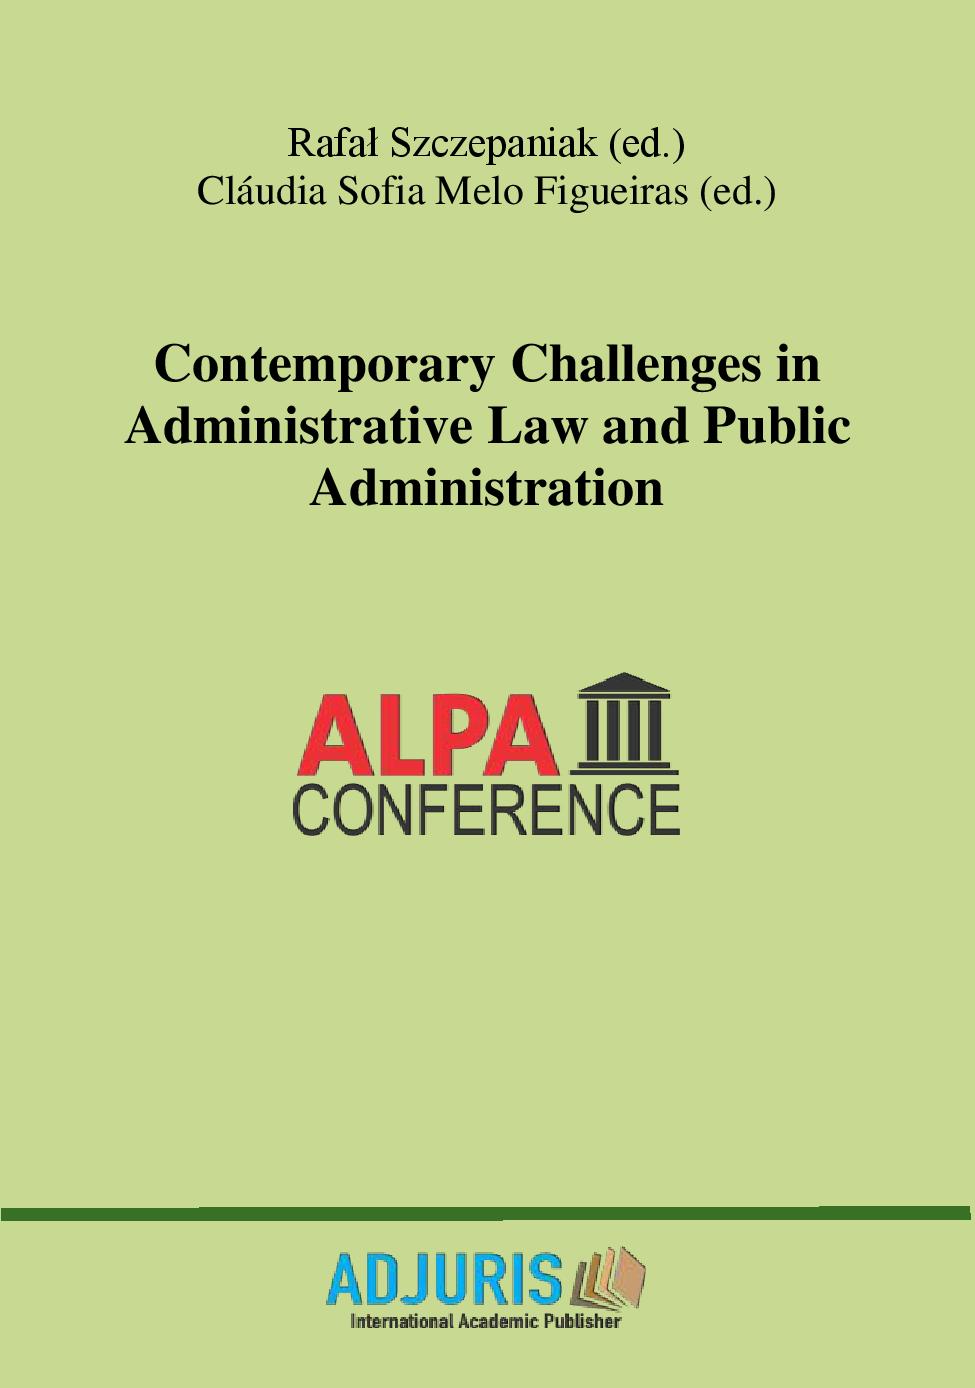 Contemporary Challenges in Administrative Law and Public Administration